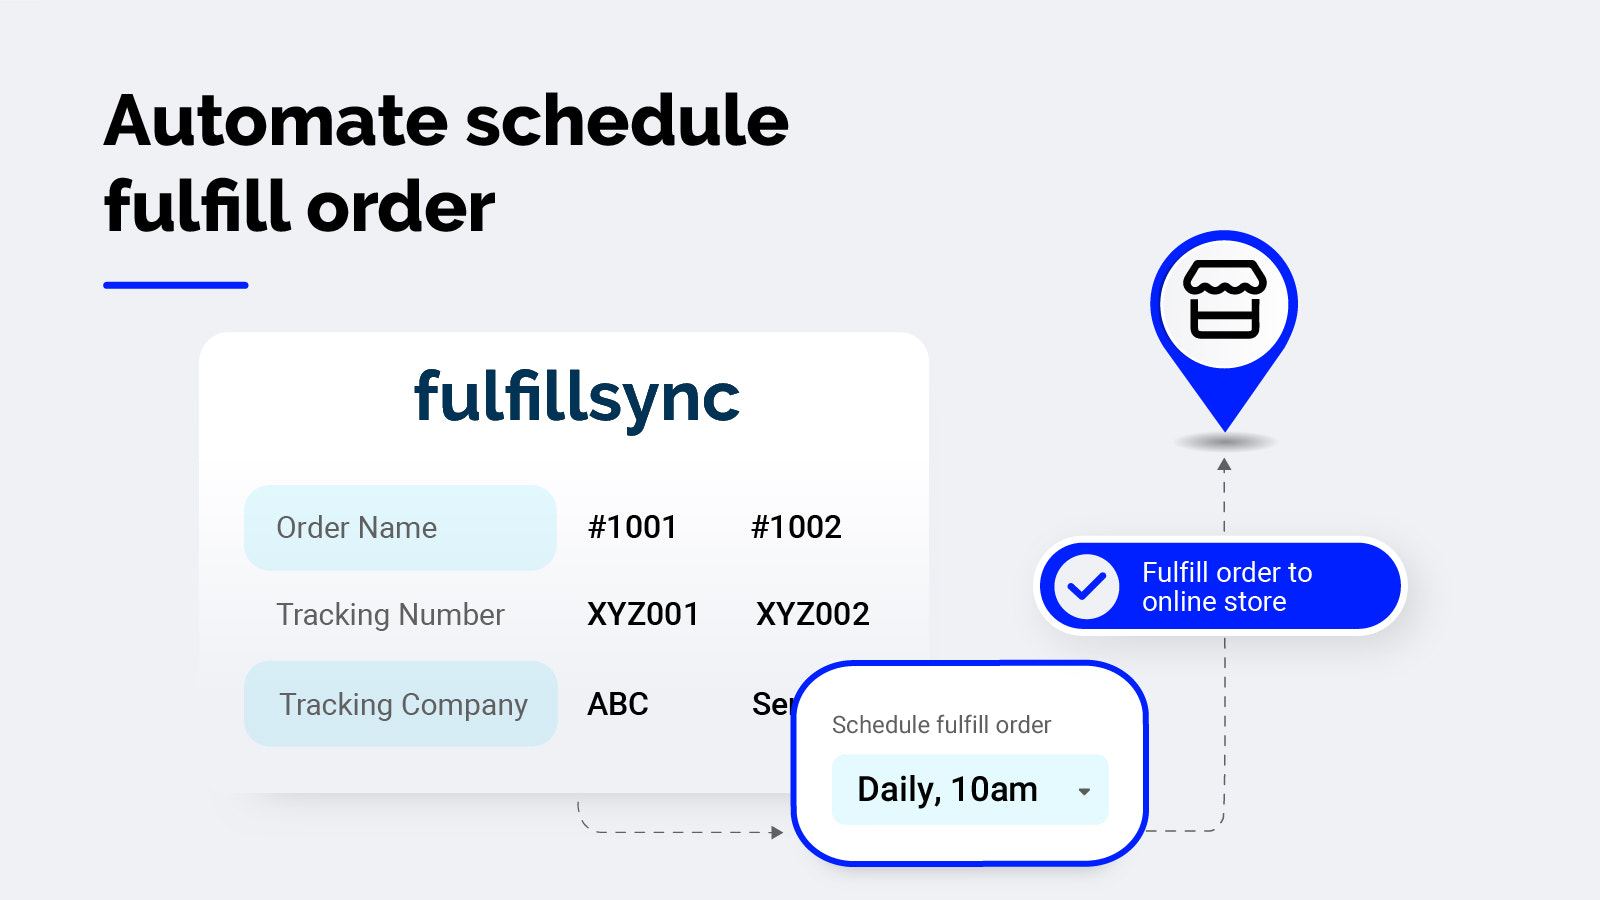 Automate schedule to provide better control